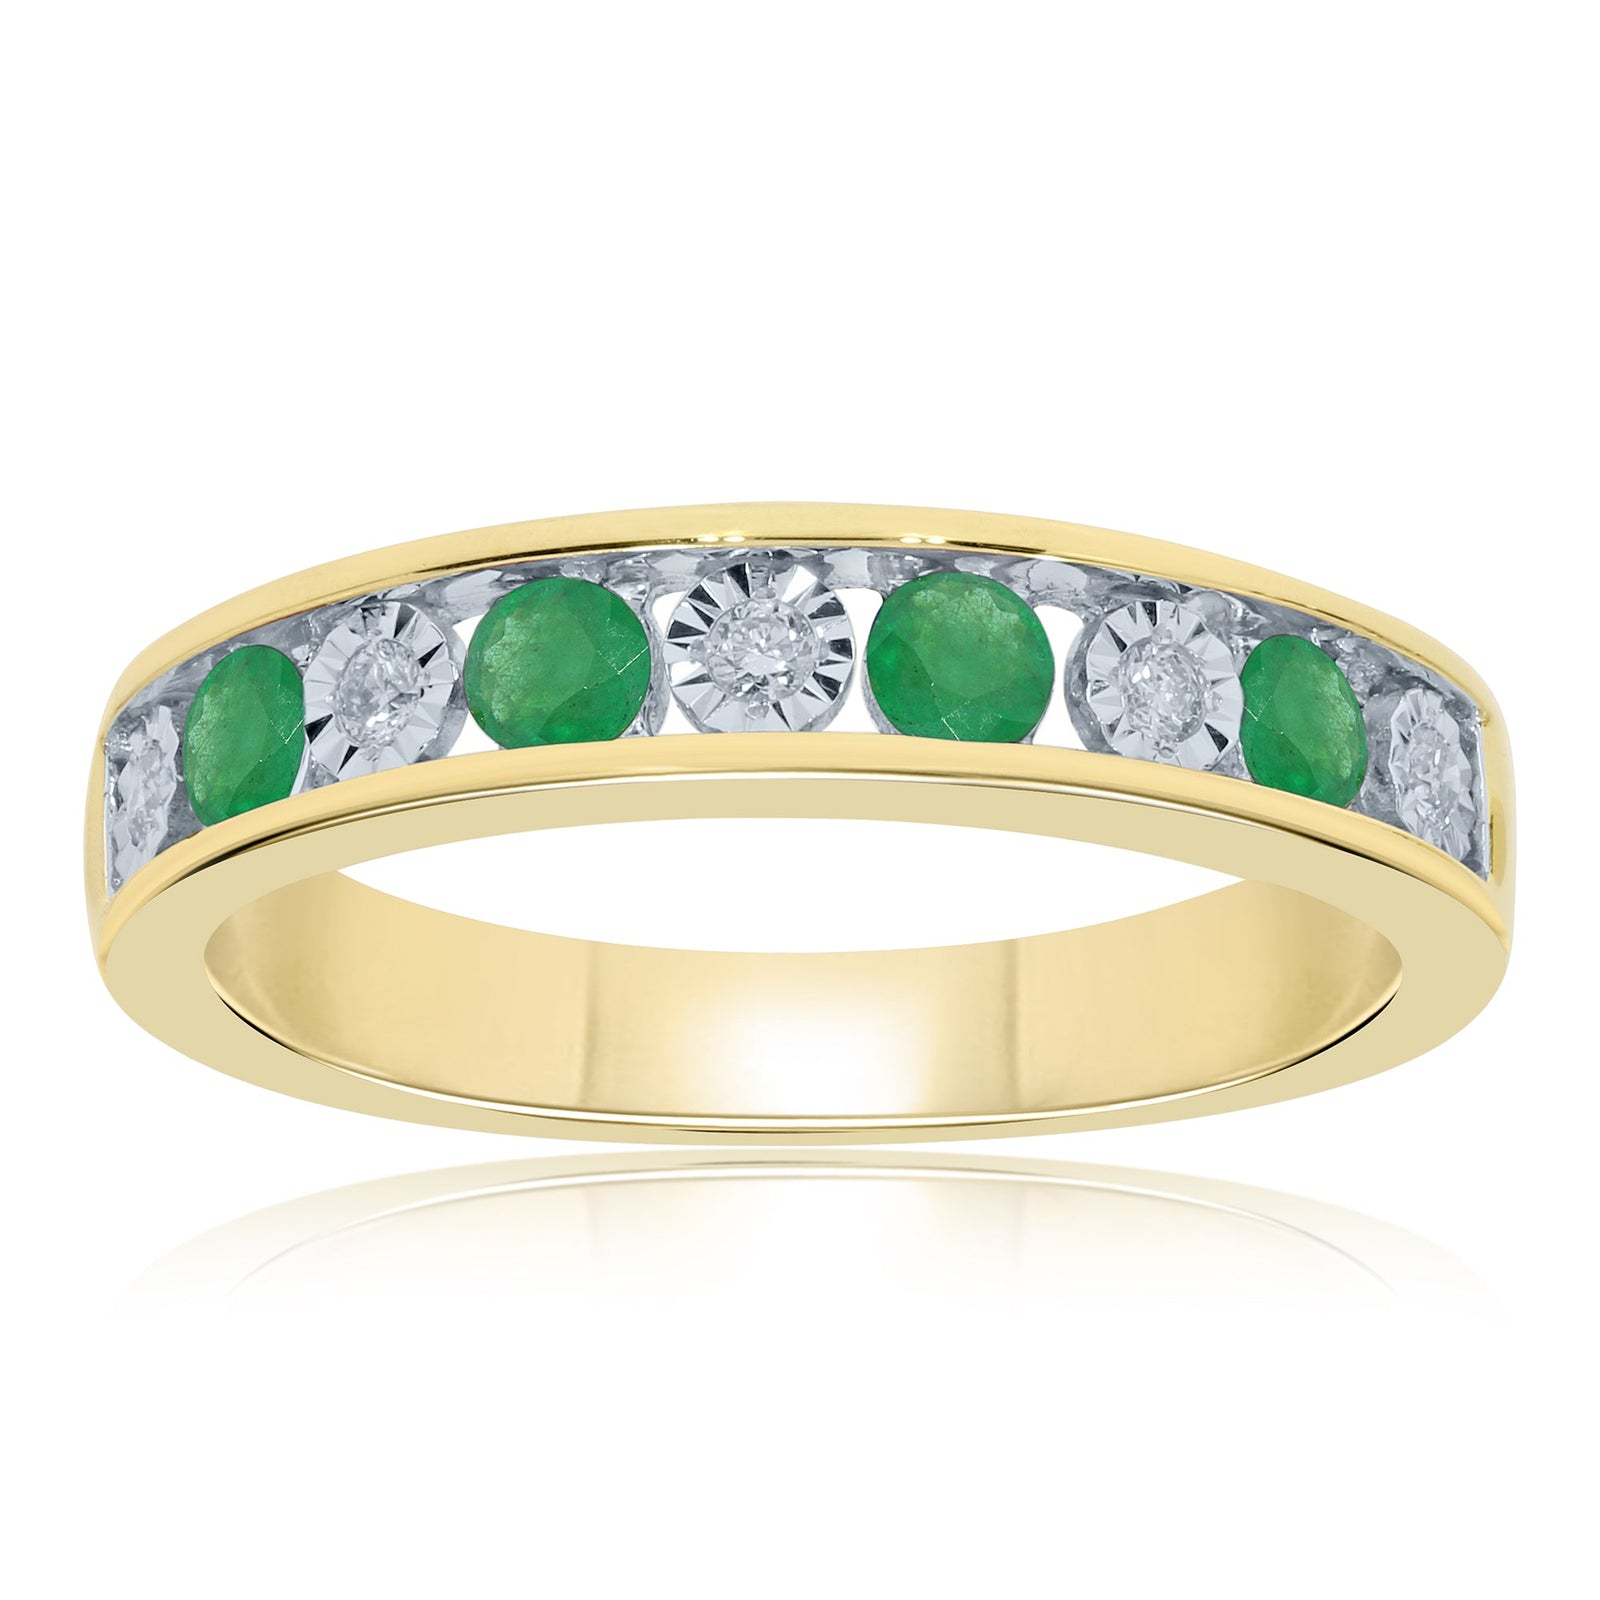 9ct gold 3mm round emerald & miracle plate diamond half et ring 0.09ct